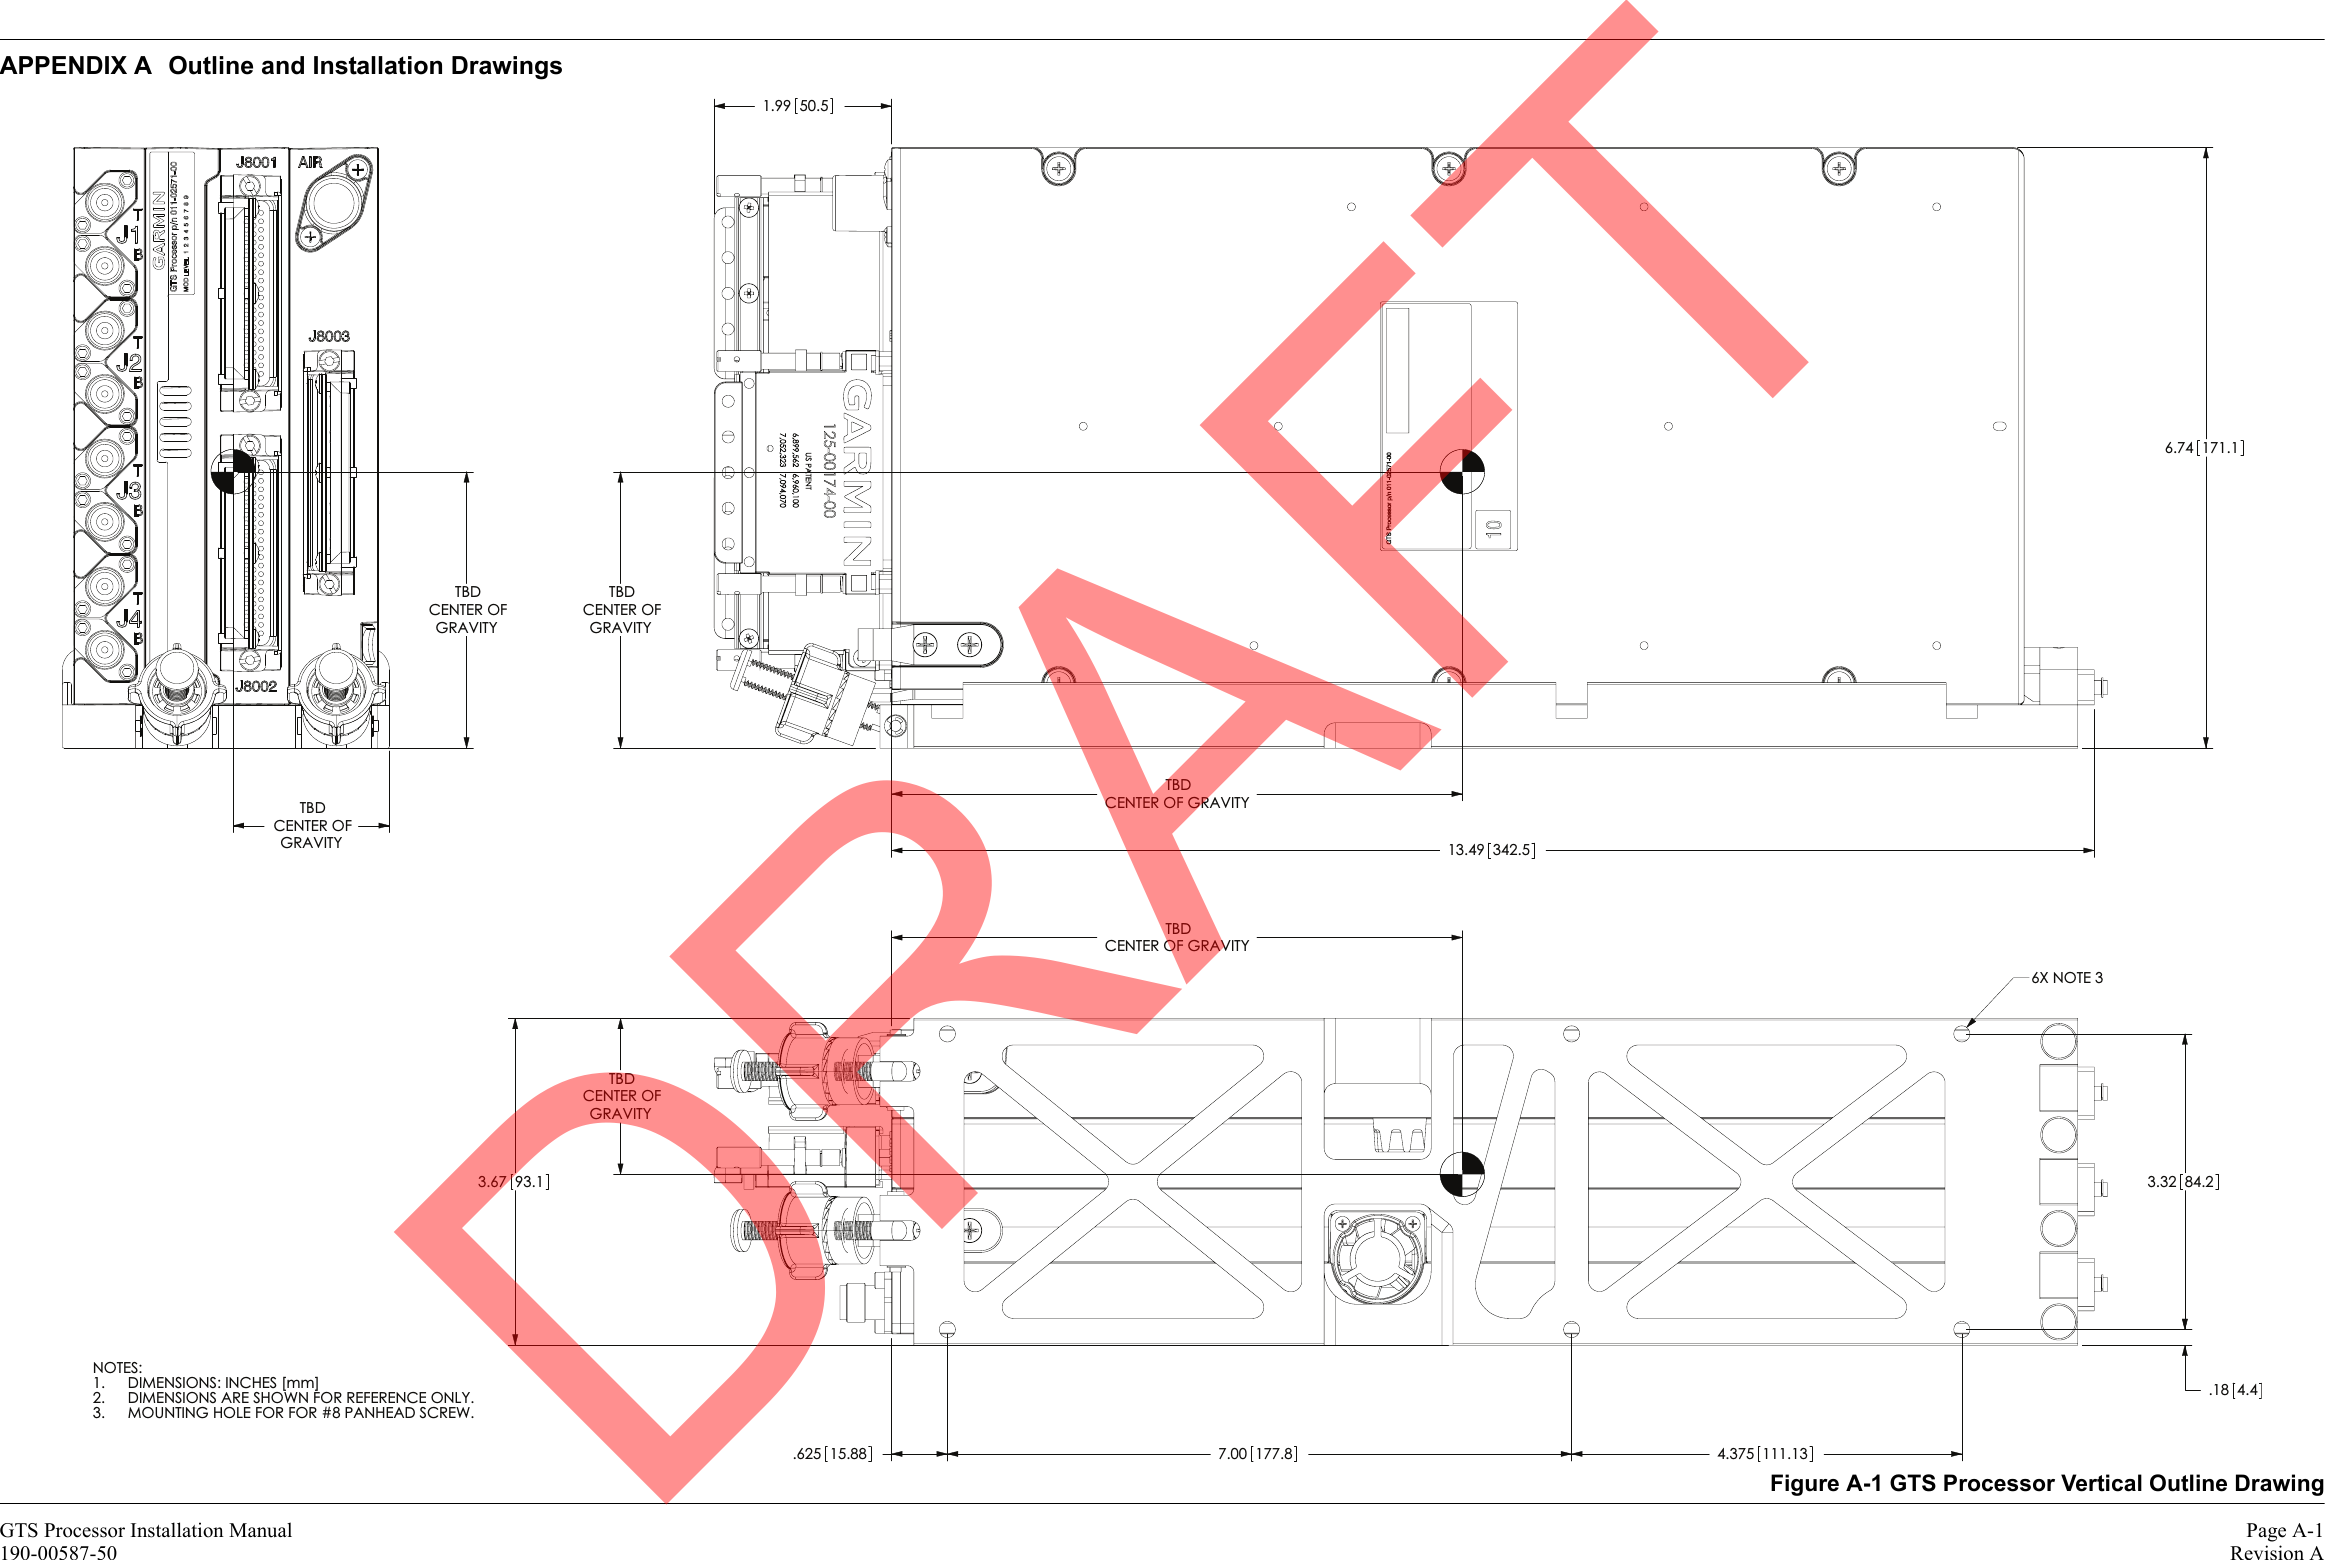 GTS Processor Installation Manual Page A-1190-00587-50 Revision AAPPENDIX A Outline and Installation DrawingsFigure A-1 GTS Processor Vertical Outline Drawing1.99 50.56.74171.113.49 342.5CENTER OF GRAVITYTBDGRAVITYTBDCENTER OF.62515.887.00177.8 4.375111.133.32 84.23.67 93.1.18 4.4CENTER OF GRAVITYTBDGRAVITYTBDCENTER OF6X NOTE 3GRAVITYTBDCENTER OFGRAVITYTBDCENTER OFNOTES:DIMENSIONS: INCHES [mm]1.DIMENSIONS ARE SHOWN FOR REFERENCE ONLY.2.MOUNTING HOLE FOR FOR #8 PANHEAD SCREW.3.DRAFT